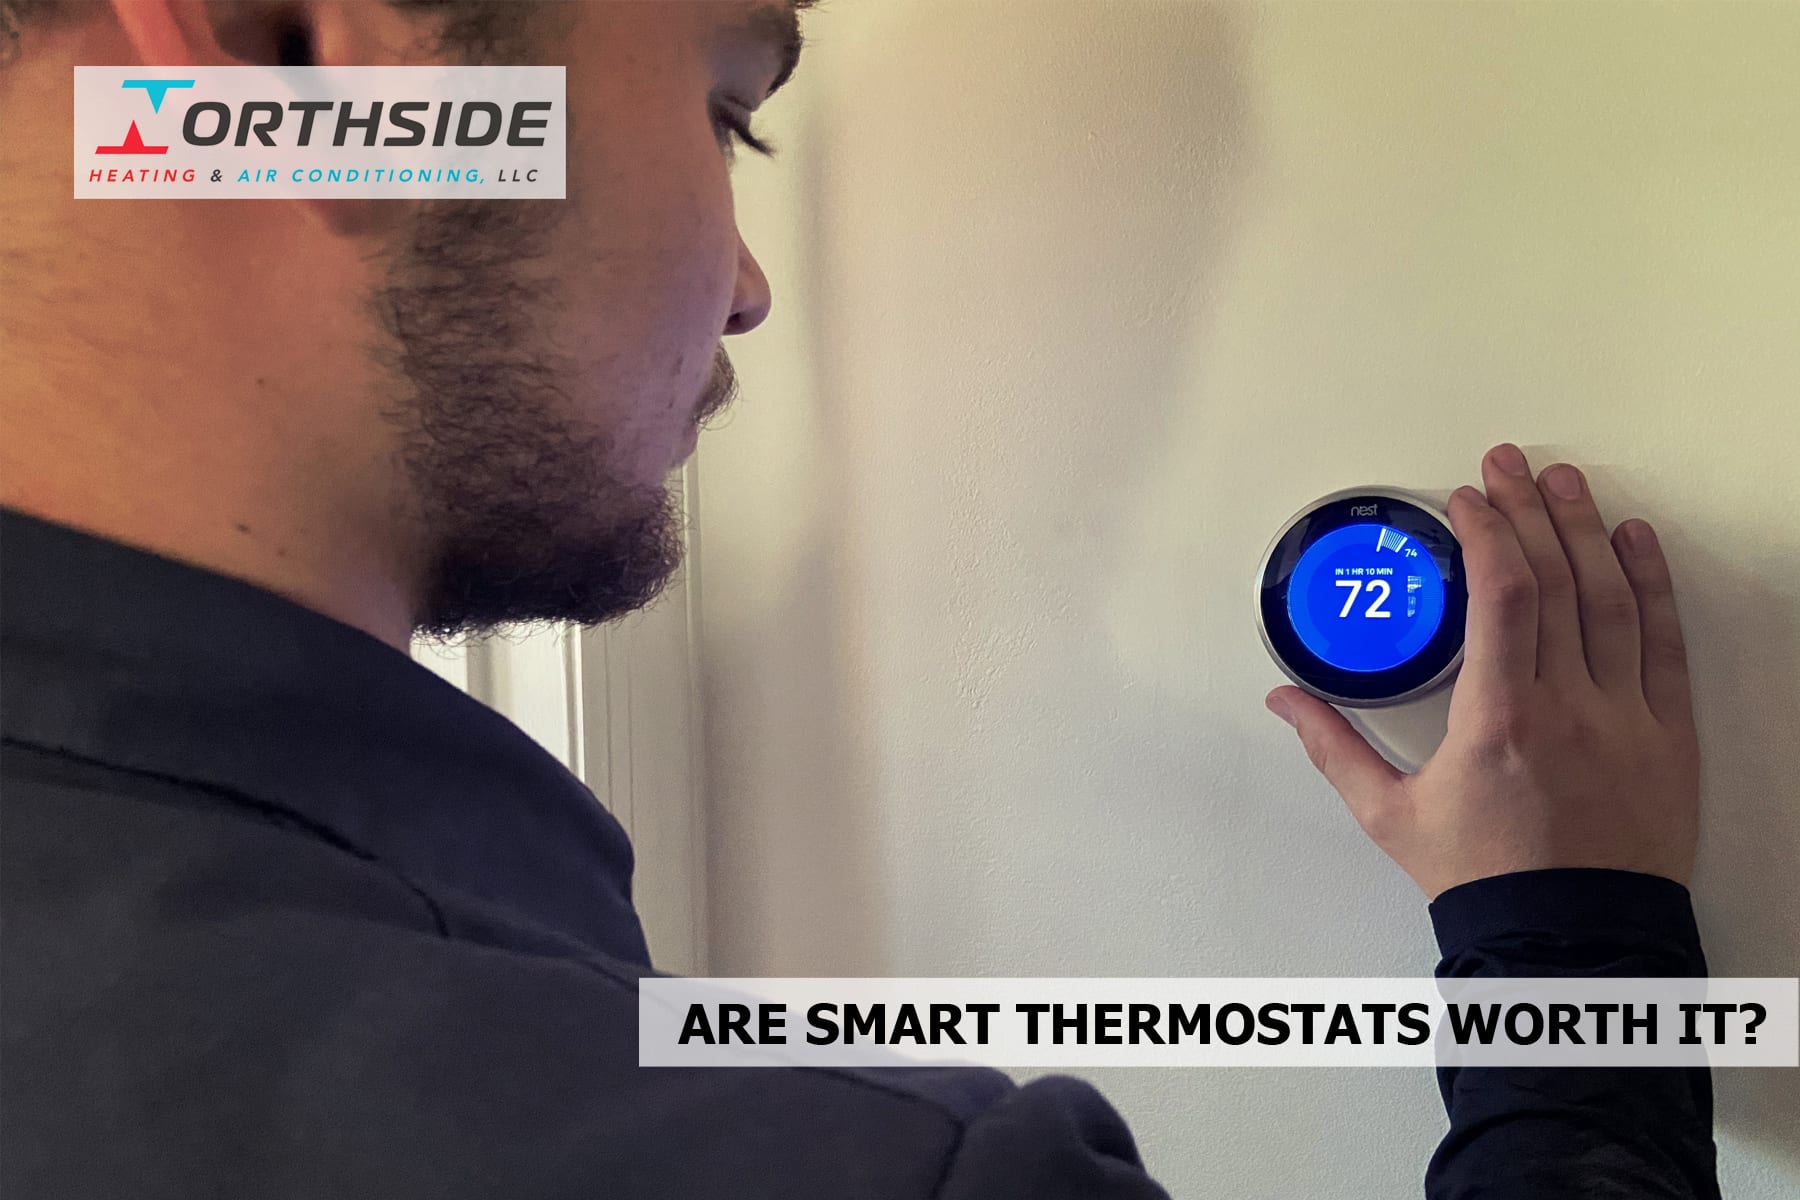 Are smart thermostats worth it?